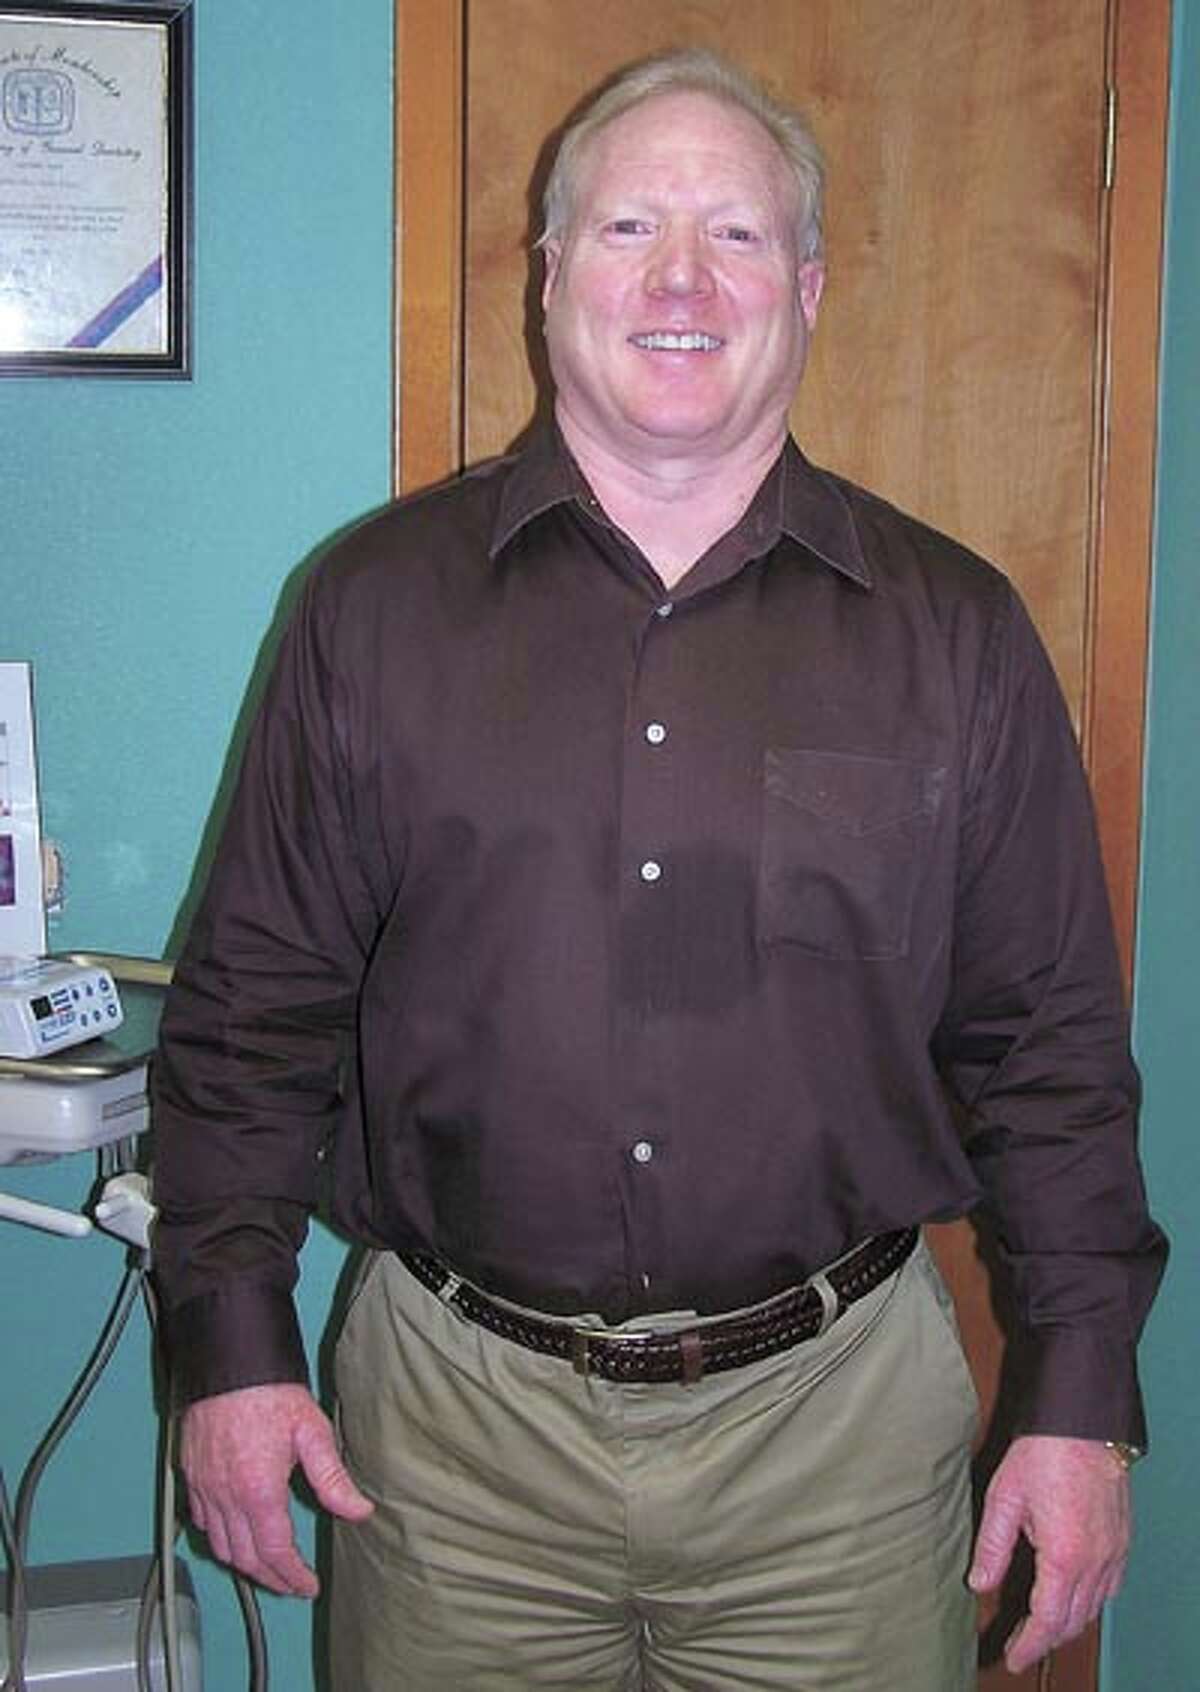  Longtime area dentist Dr. Russell Toler is now at Dental Solution’s Midland office Monday through Wednesday, and on Saturday from 9-1. Call 432-697-4200 for an appointment.